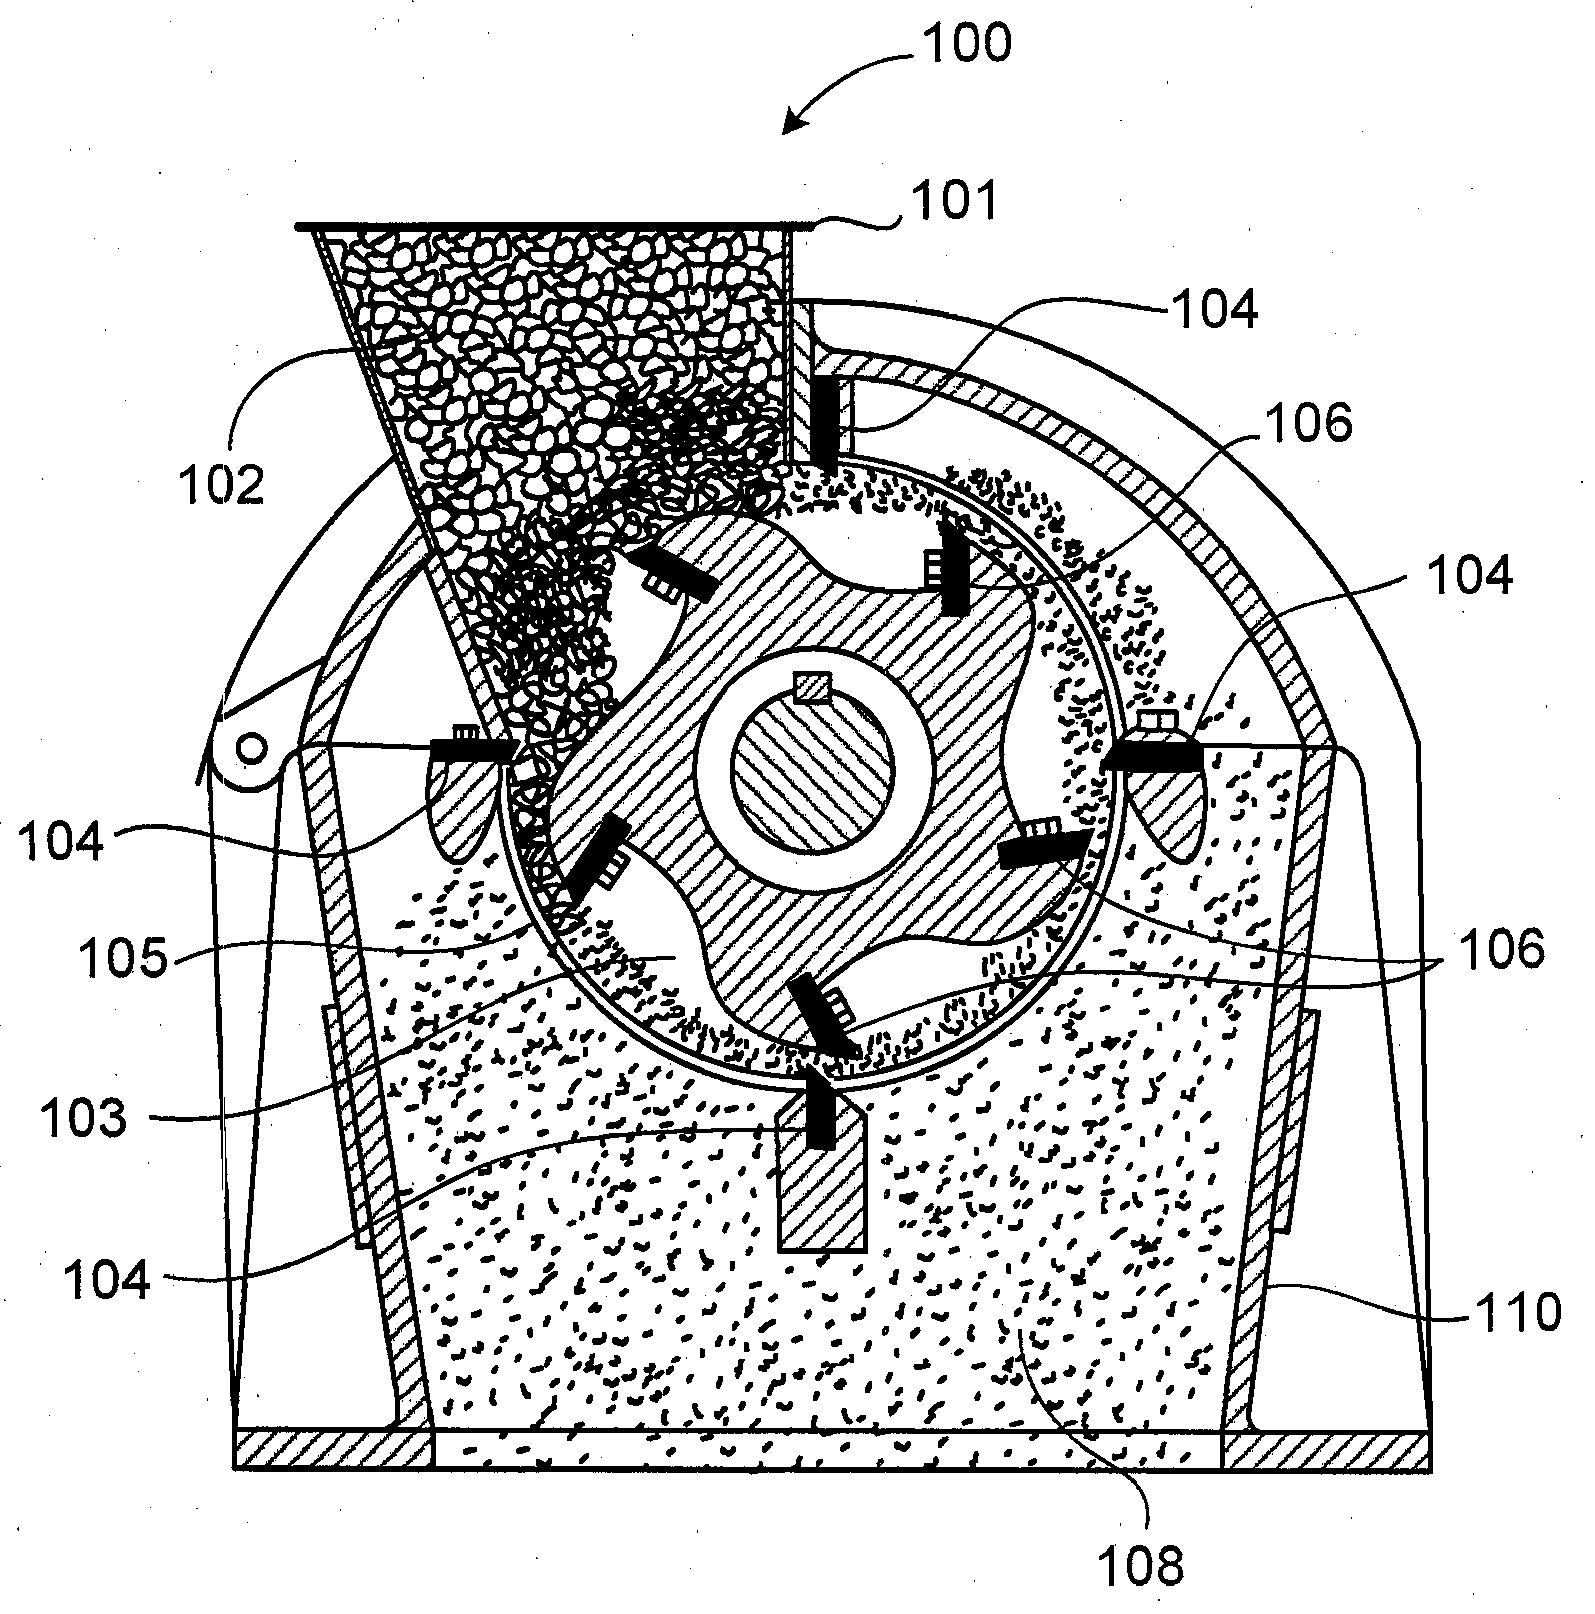 Systems and methods for producing biofuels and related materials